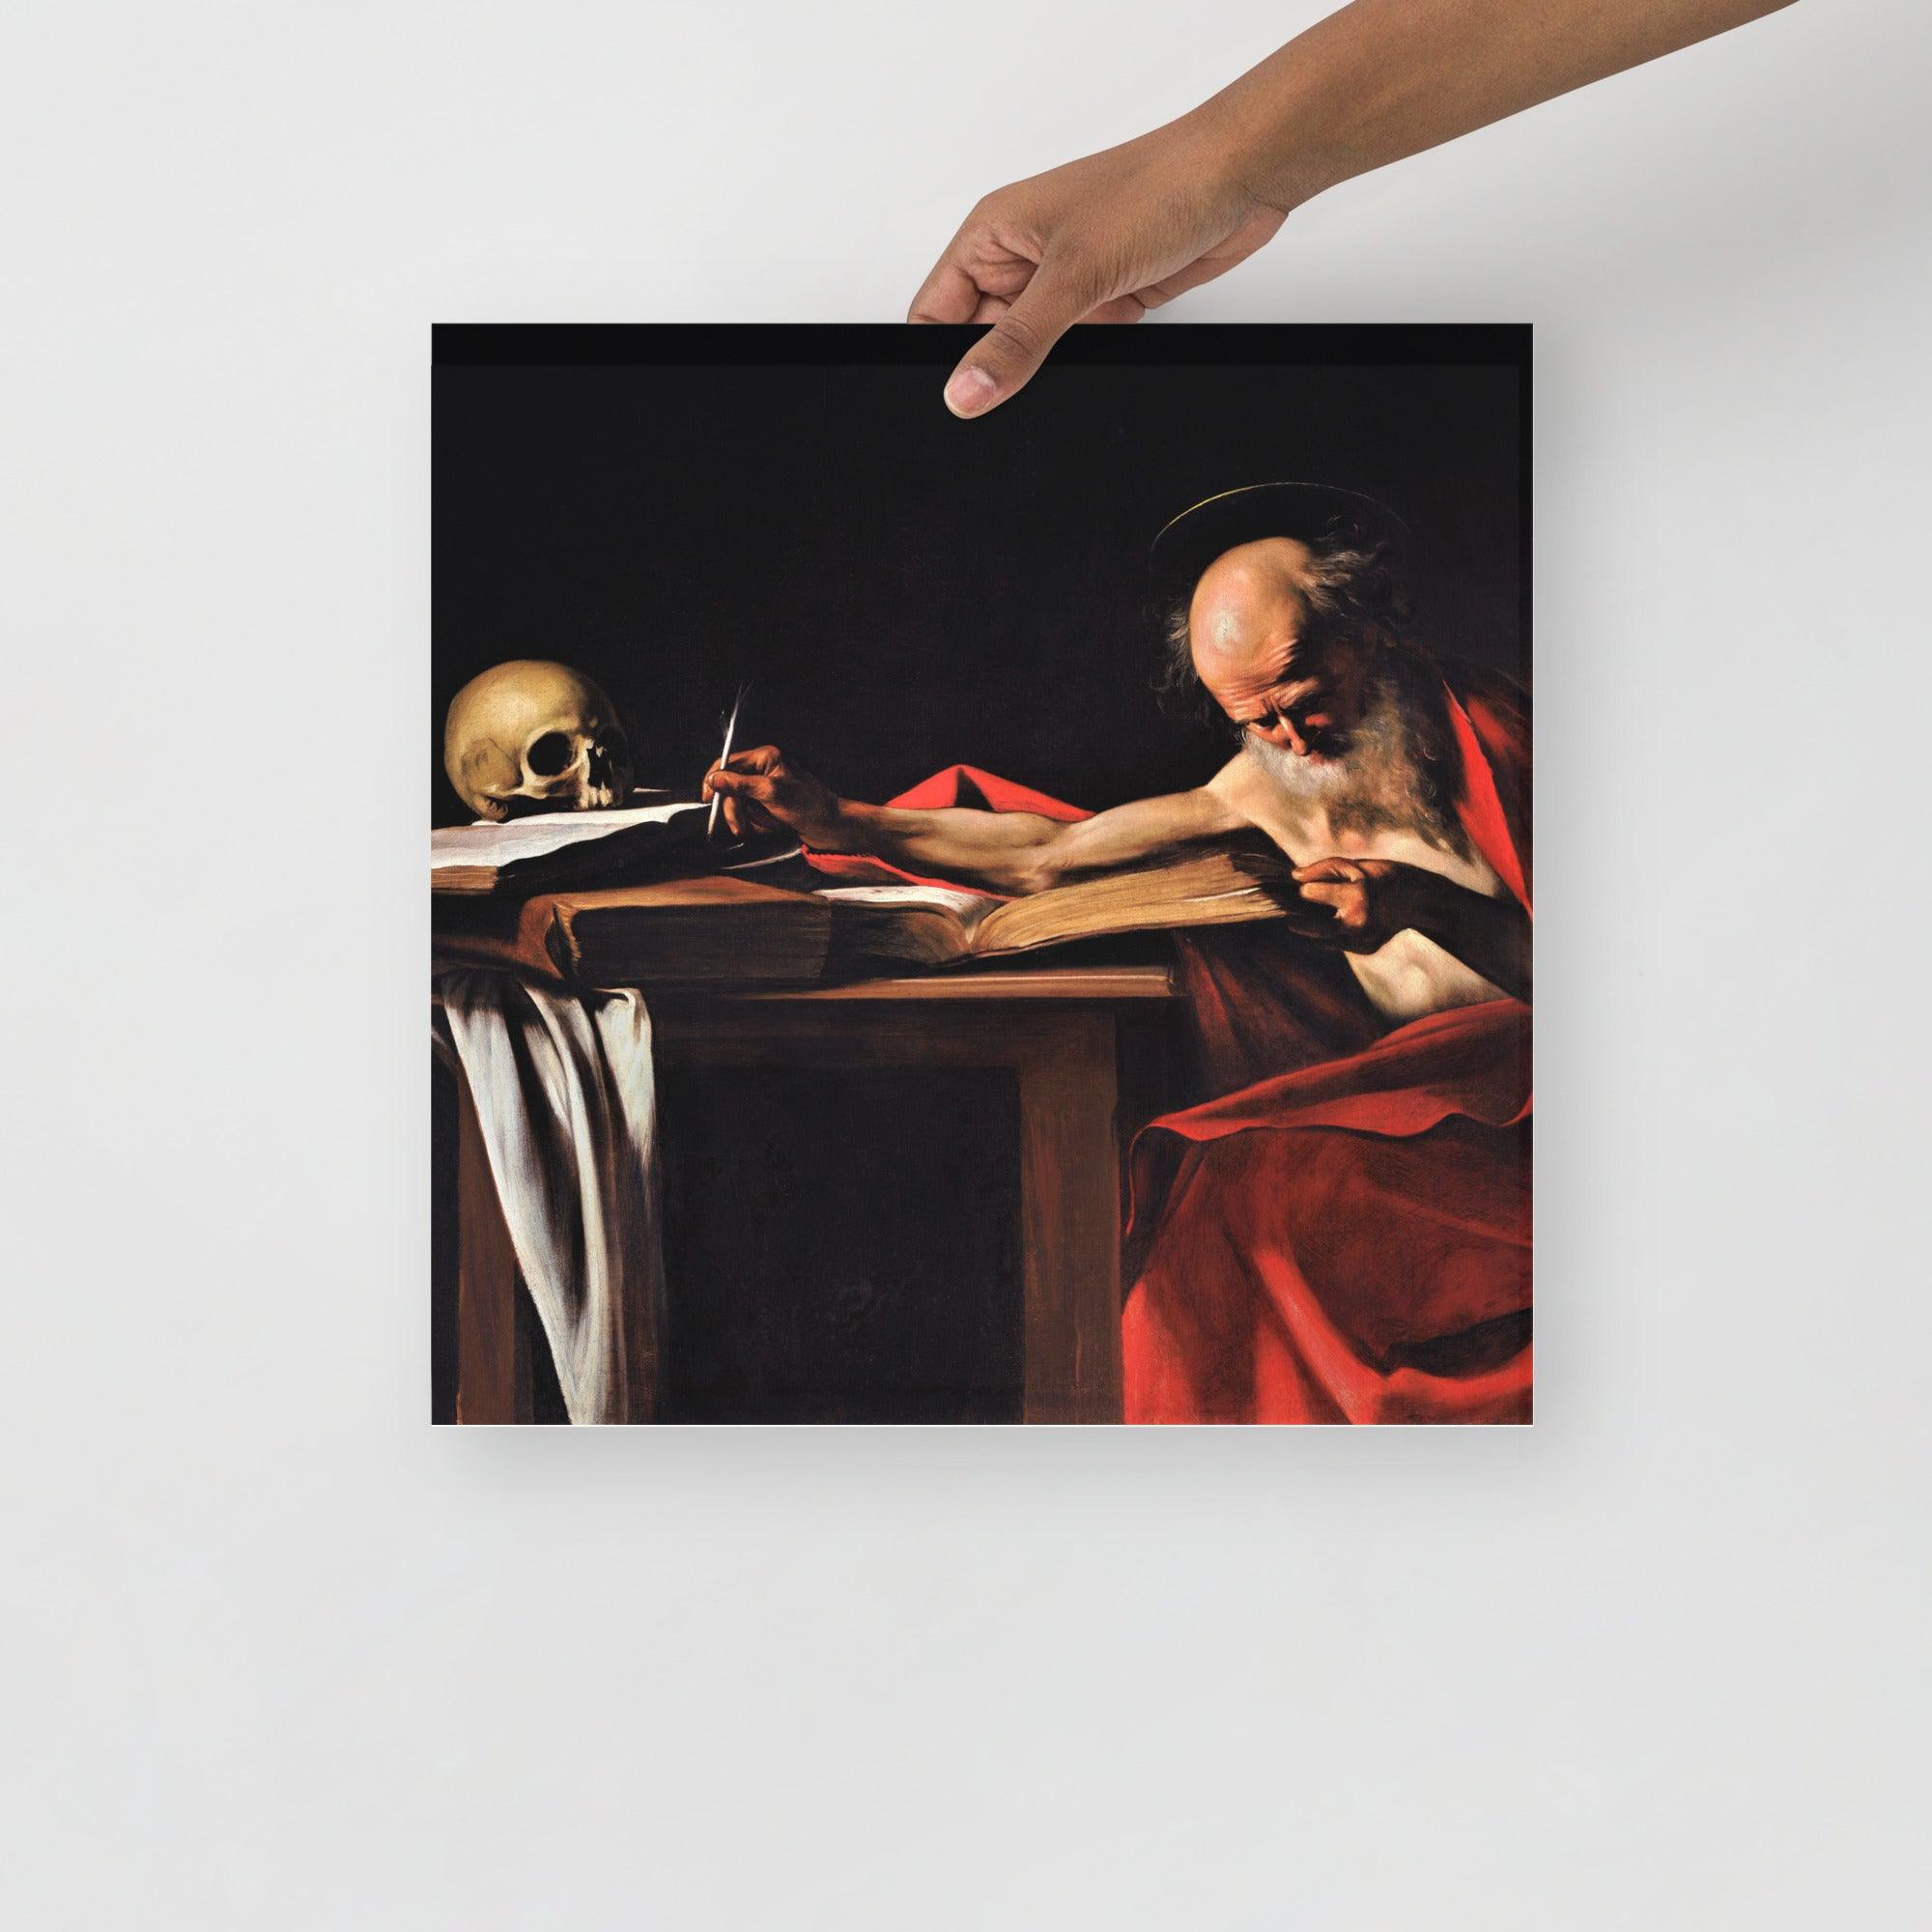 A Saint Jerome Writing by Caravaggio poster on a plain backdrop in size 16x16”.